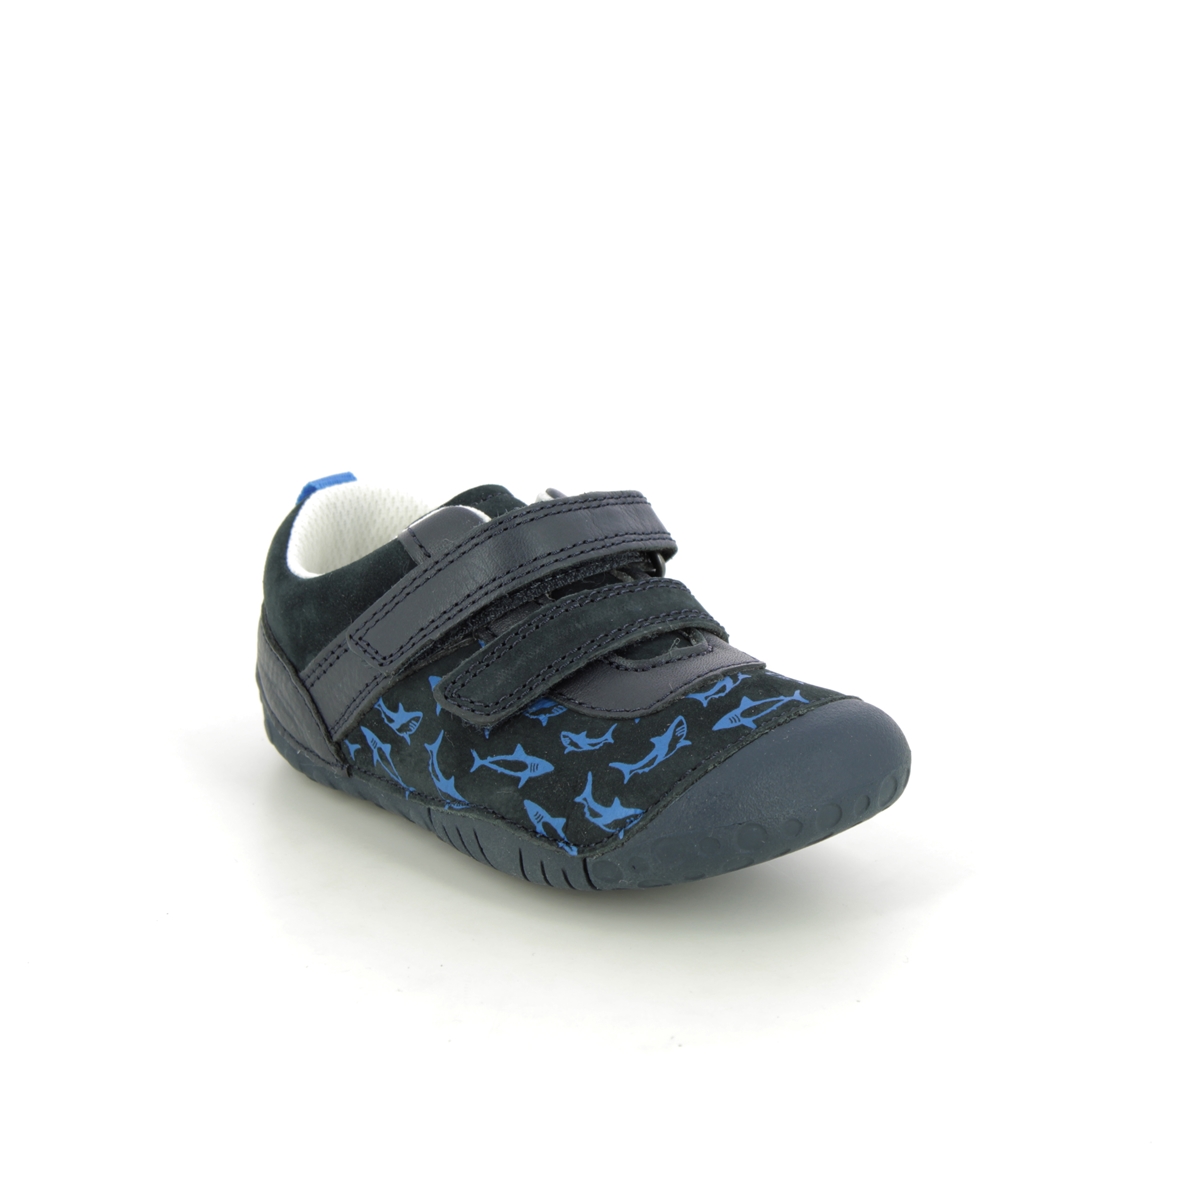 Start Rite - Little Fin In Navy Leather 0777-96F In Size 2.5 In Plain Navy Leather Boys First And Toddler Shoes  In Navy Leather For kids